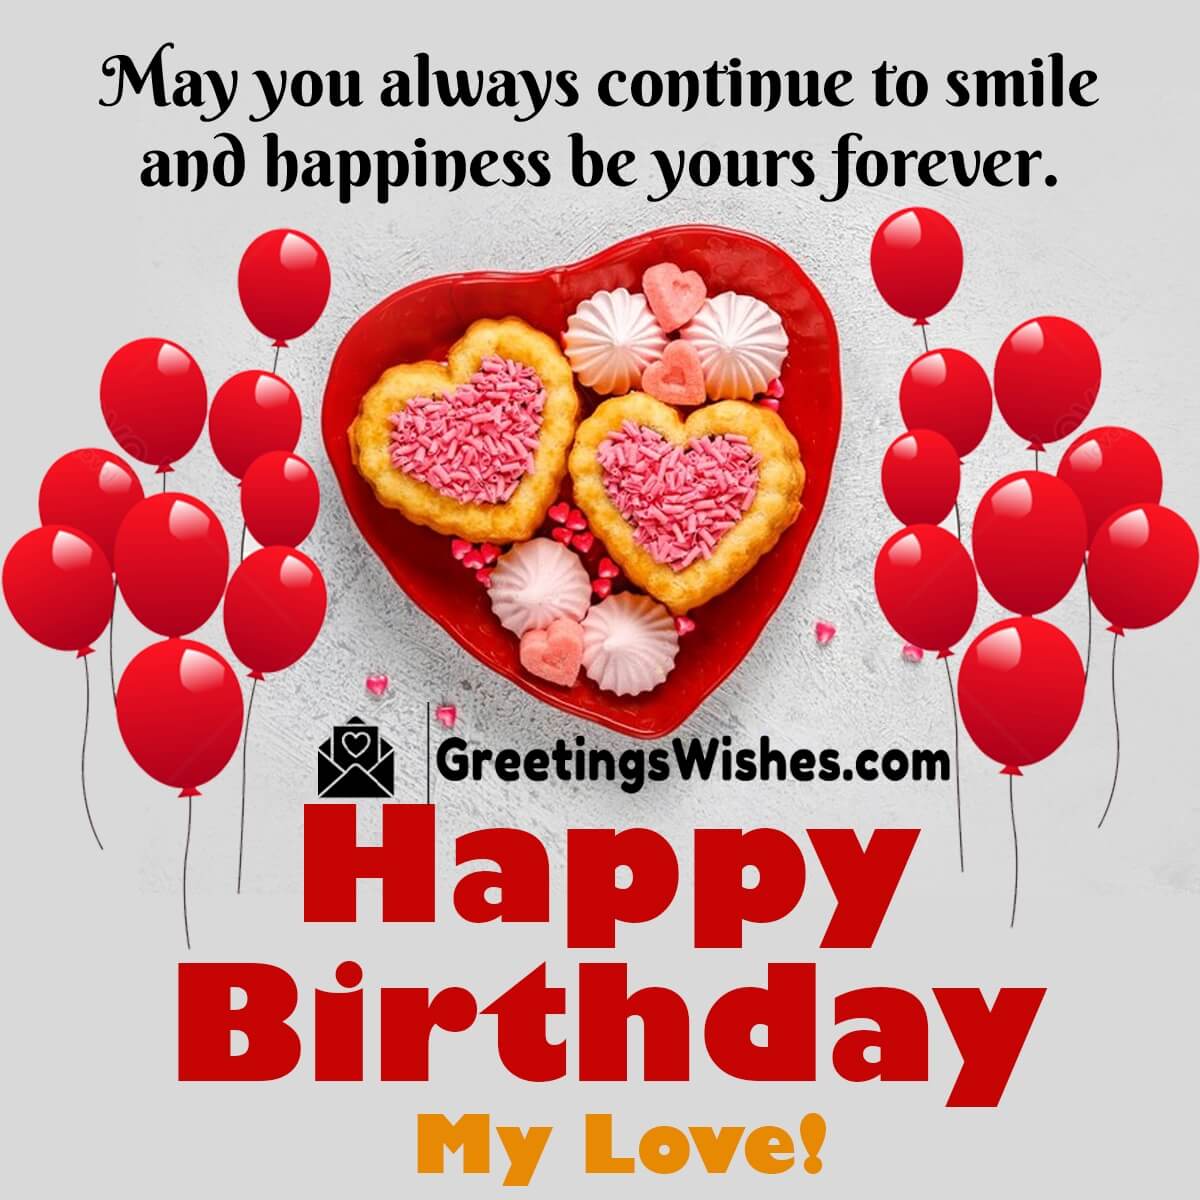 Romantic Birthday Wishes - Greetings Wishes